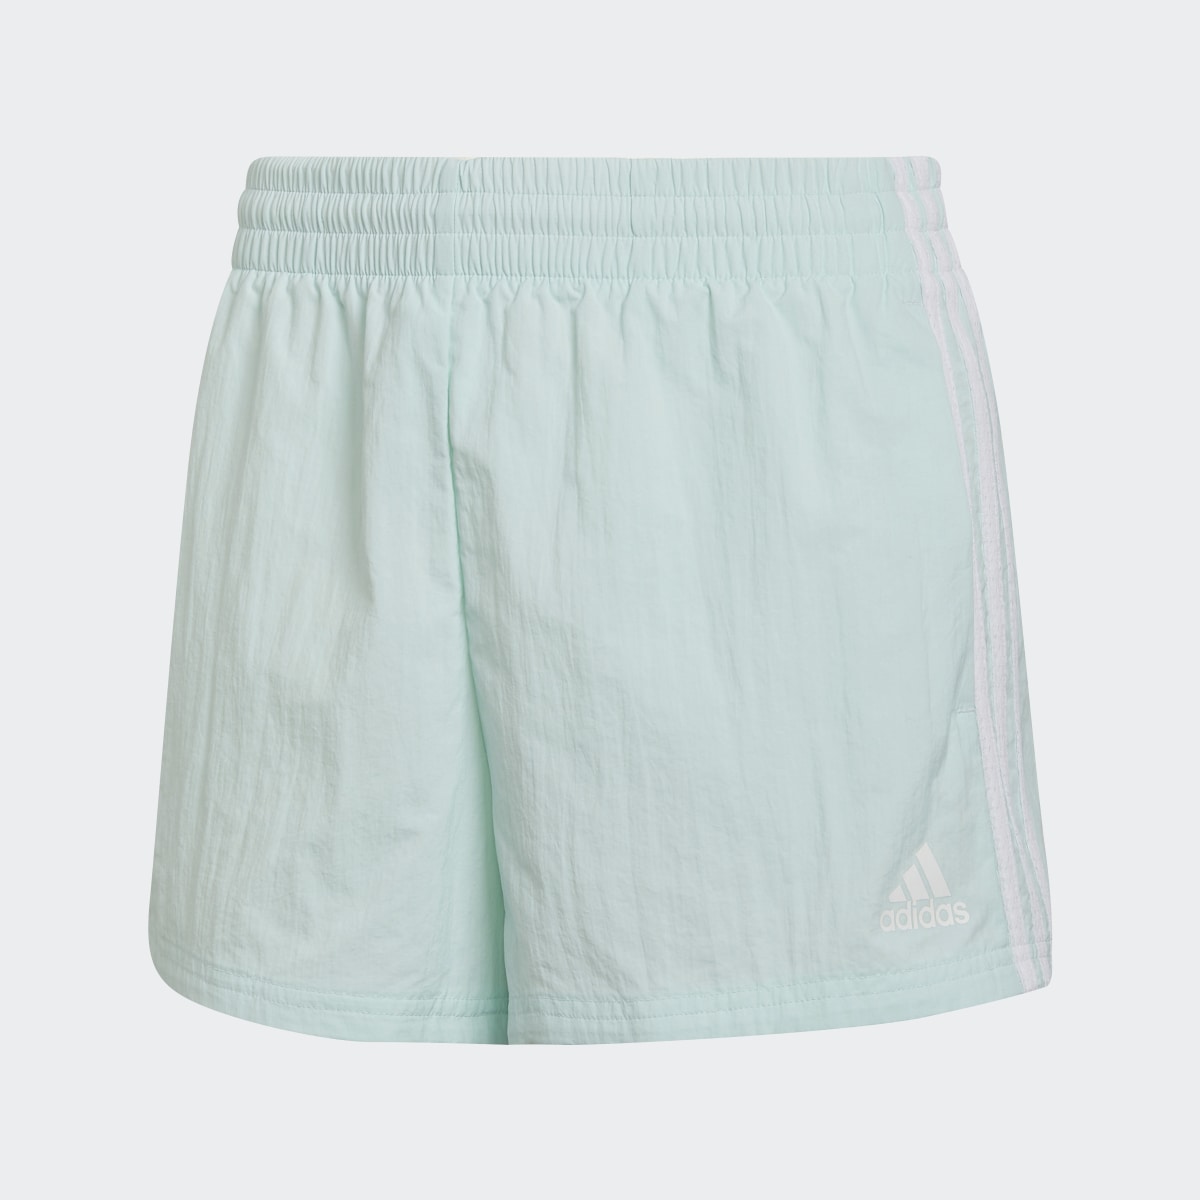 Adidas Essentials 3-Stripes Woven Shorts (Loose Fit). 5